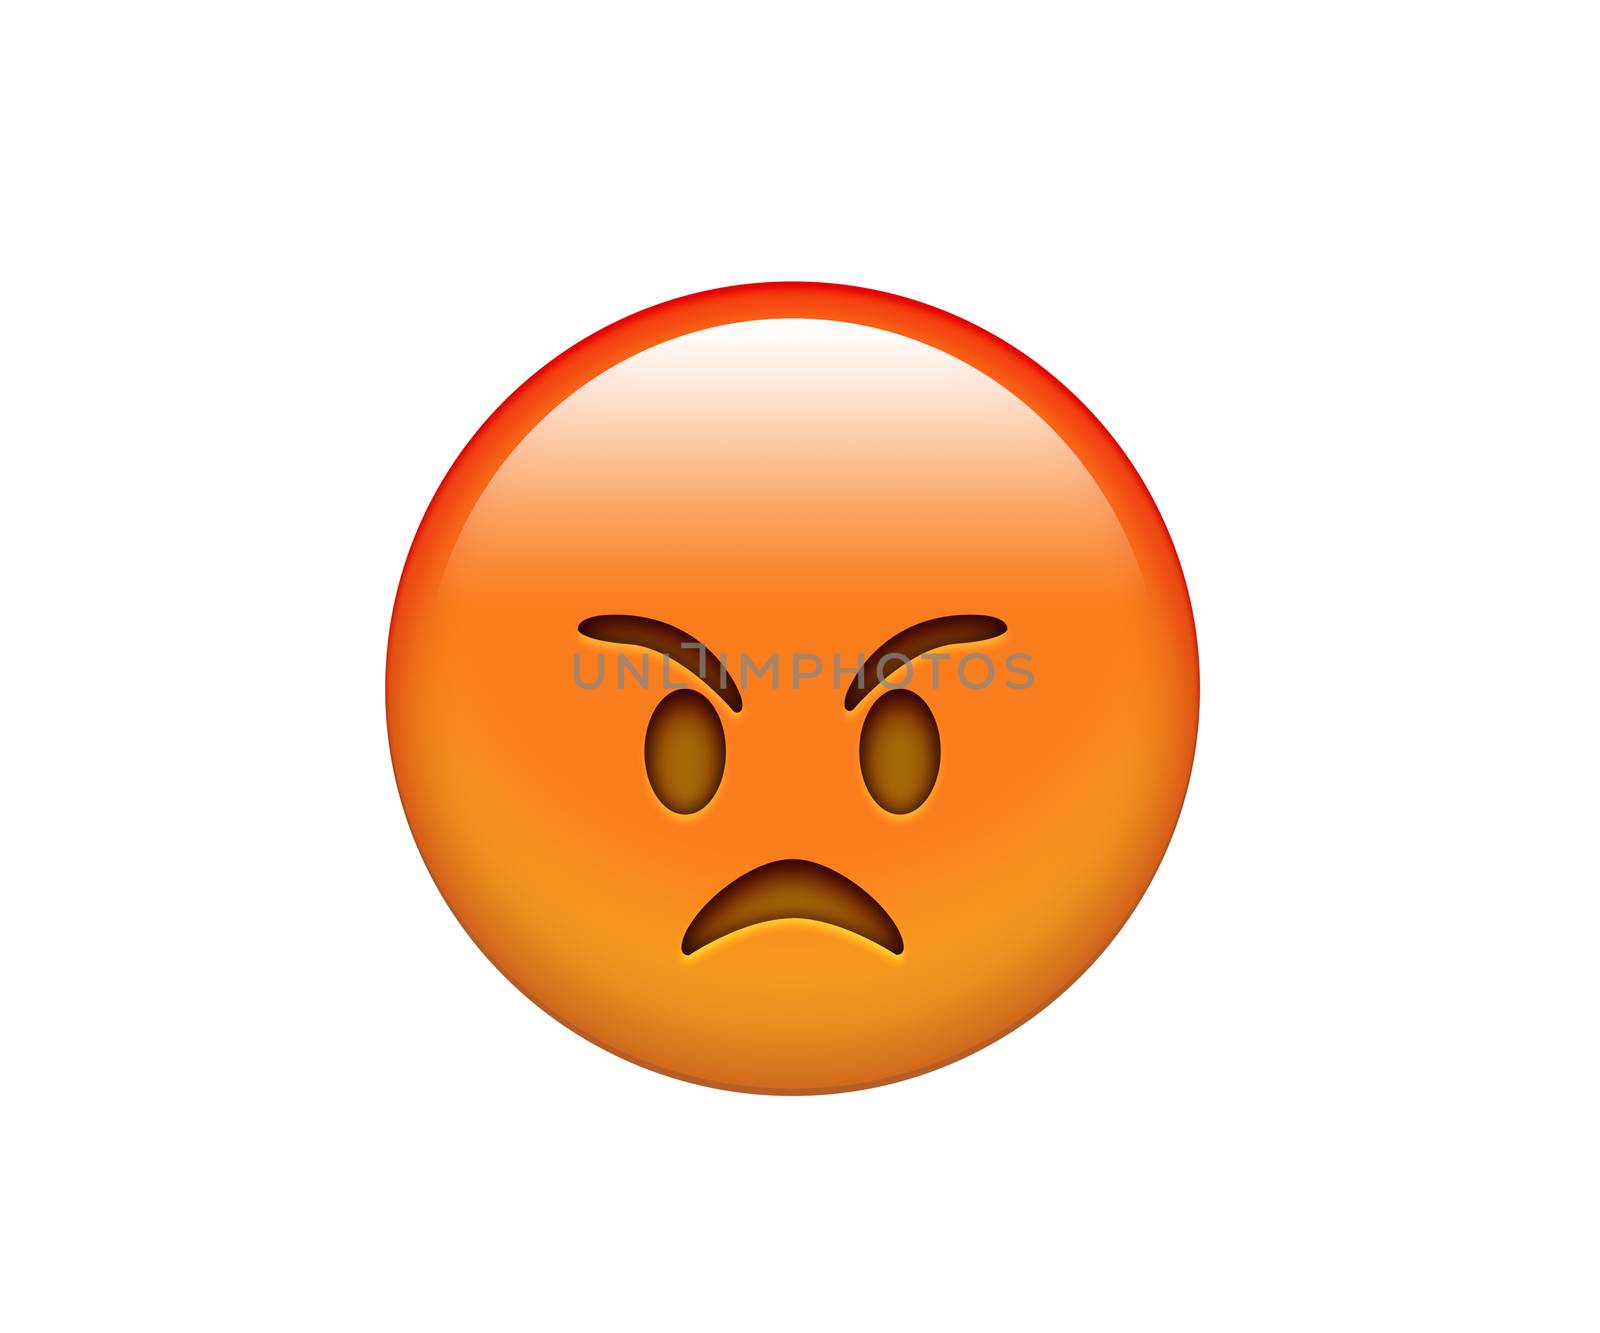 The emoji angry emotional red face icon